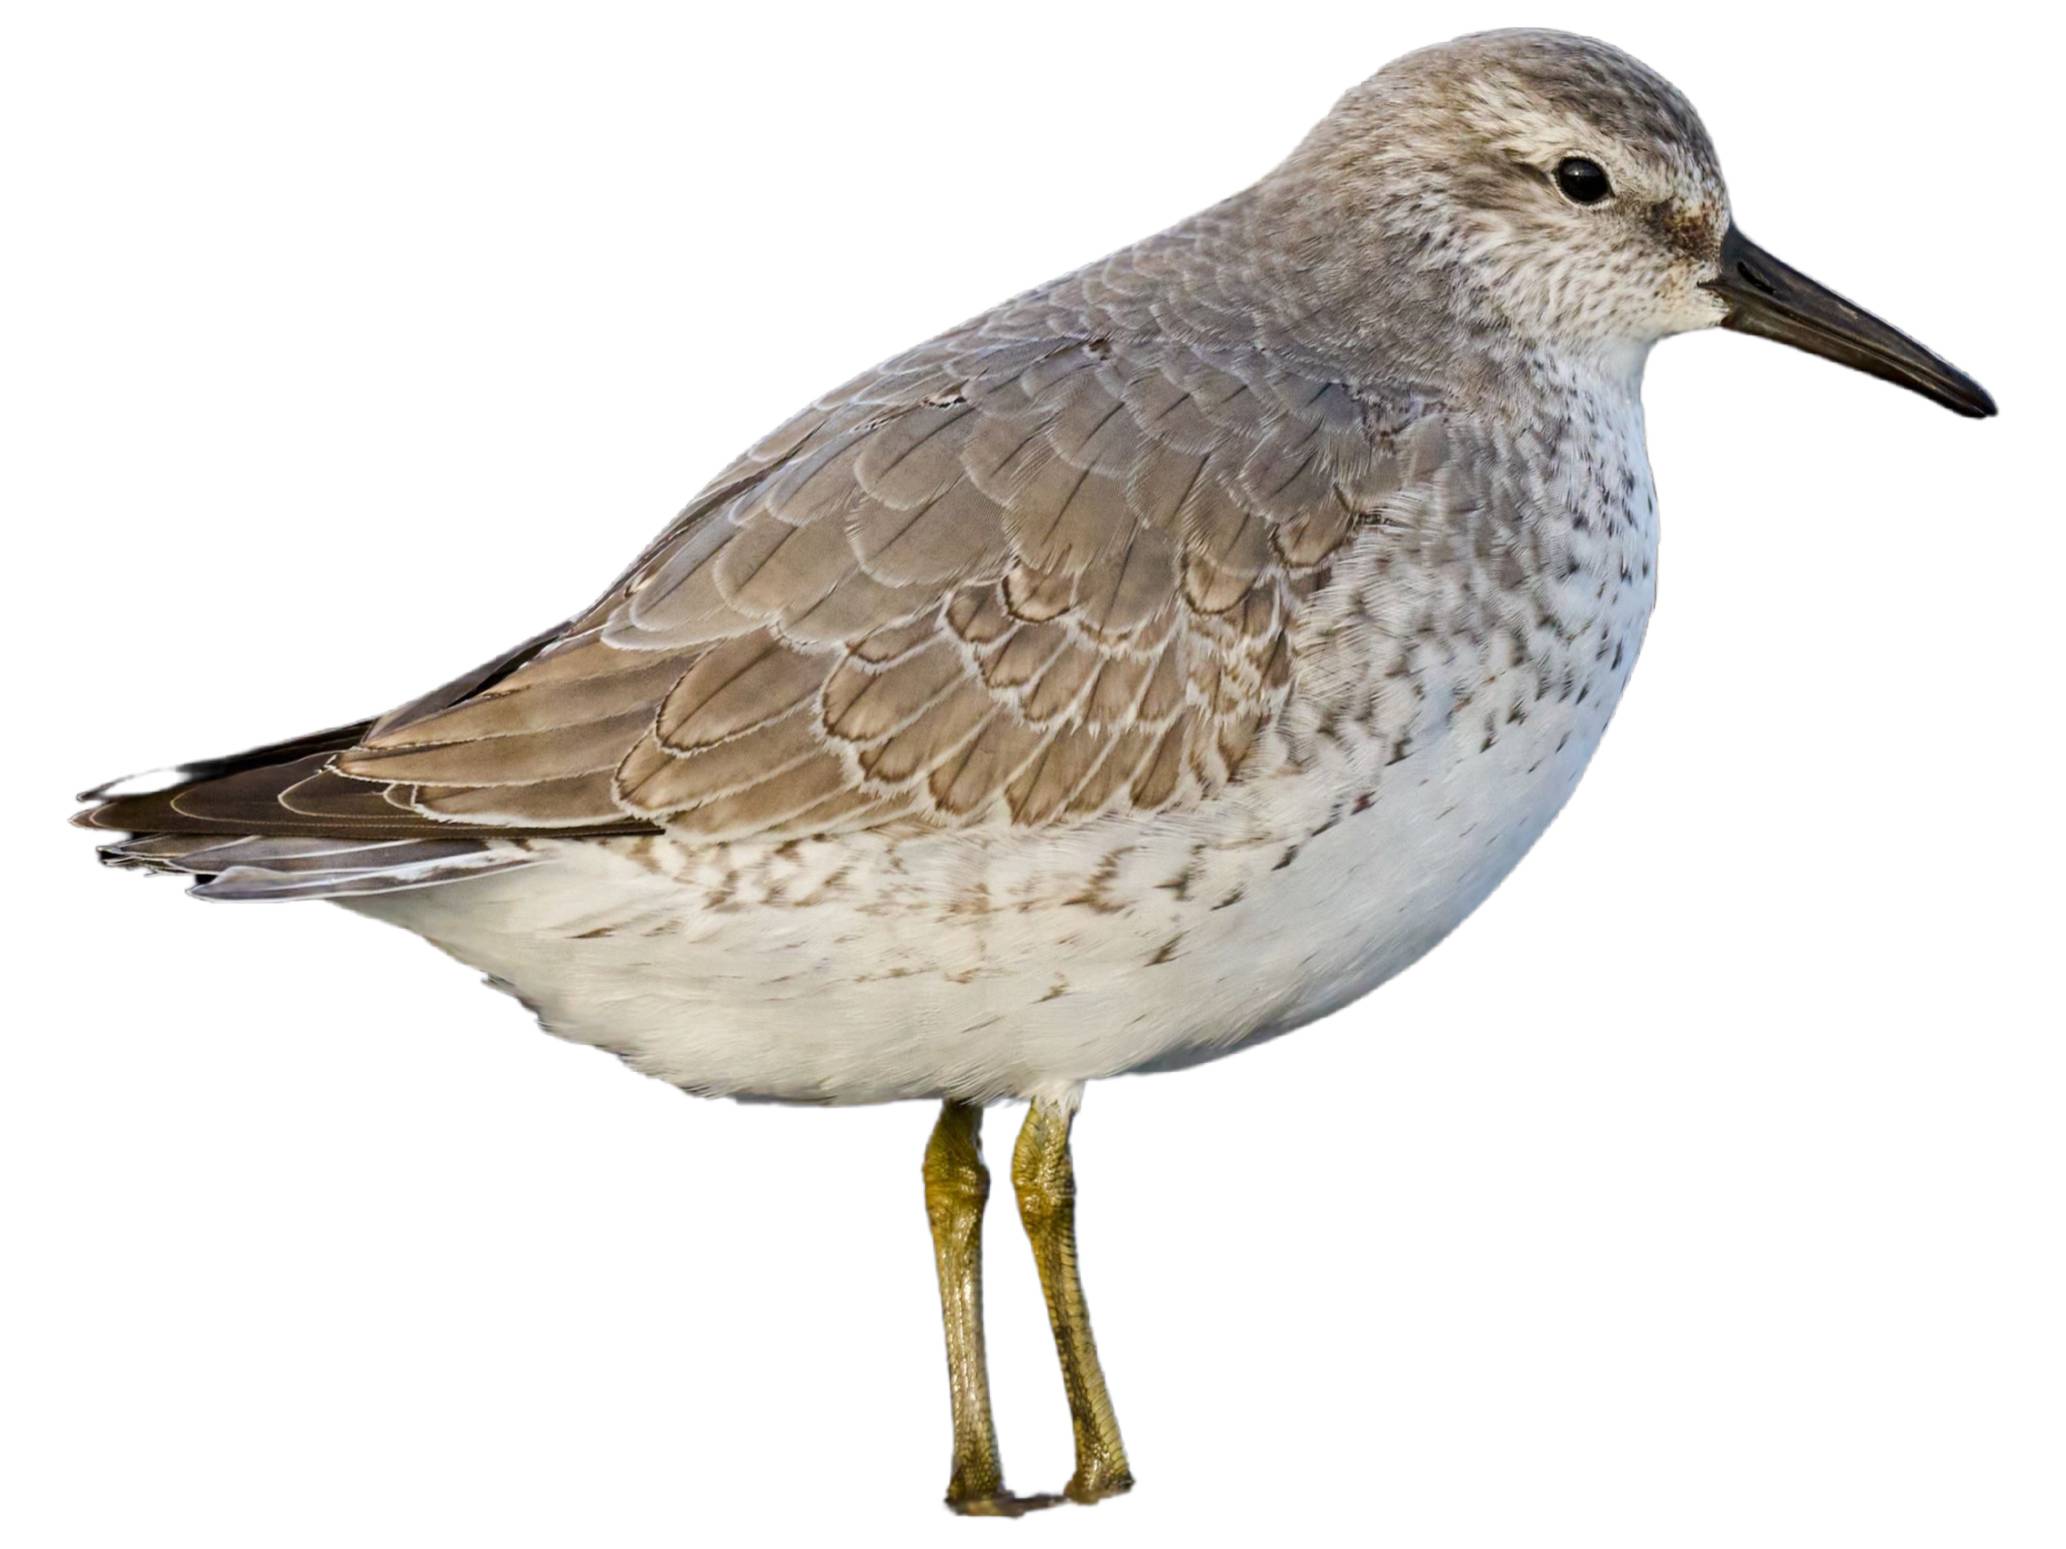 A photo of a Red Knot (Calidris canutus)